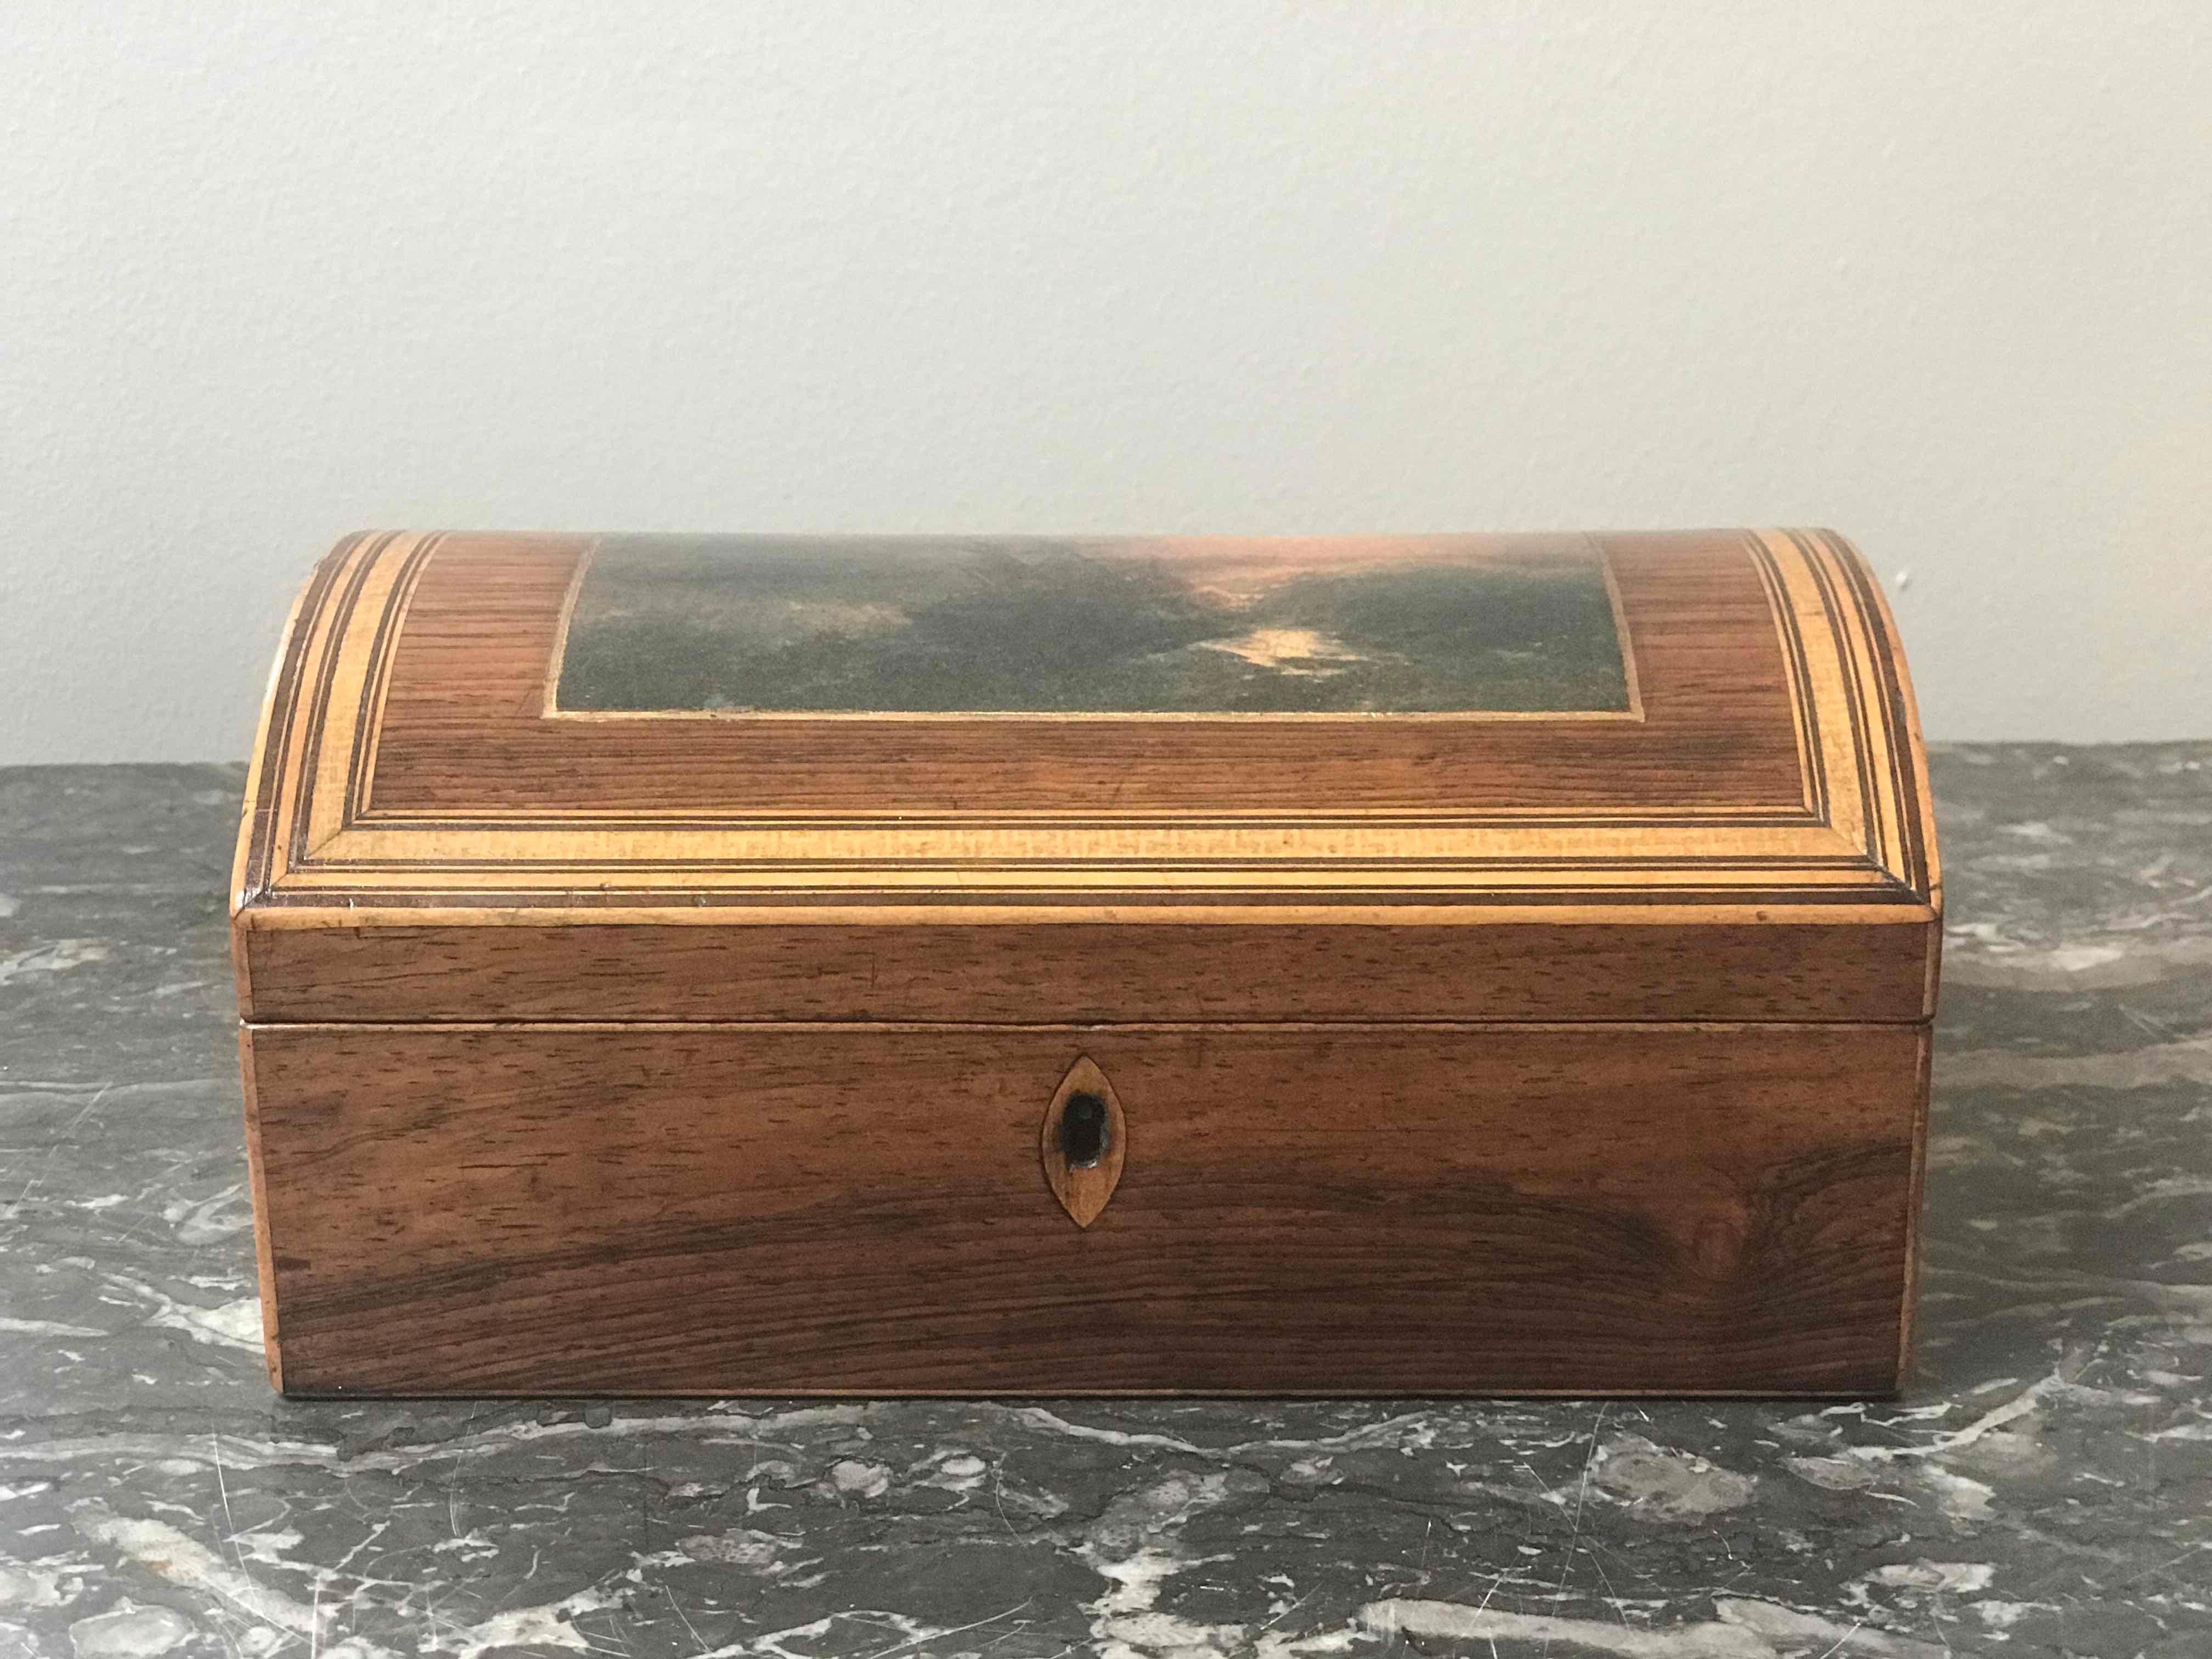 Late Victorian Wooden Dome Box with Seascape Scene from 1880s England